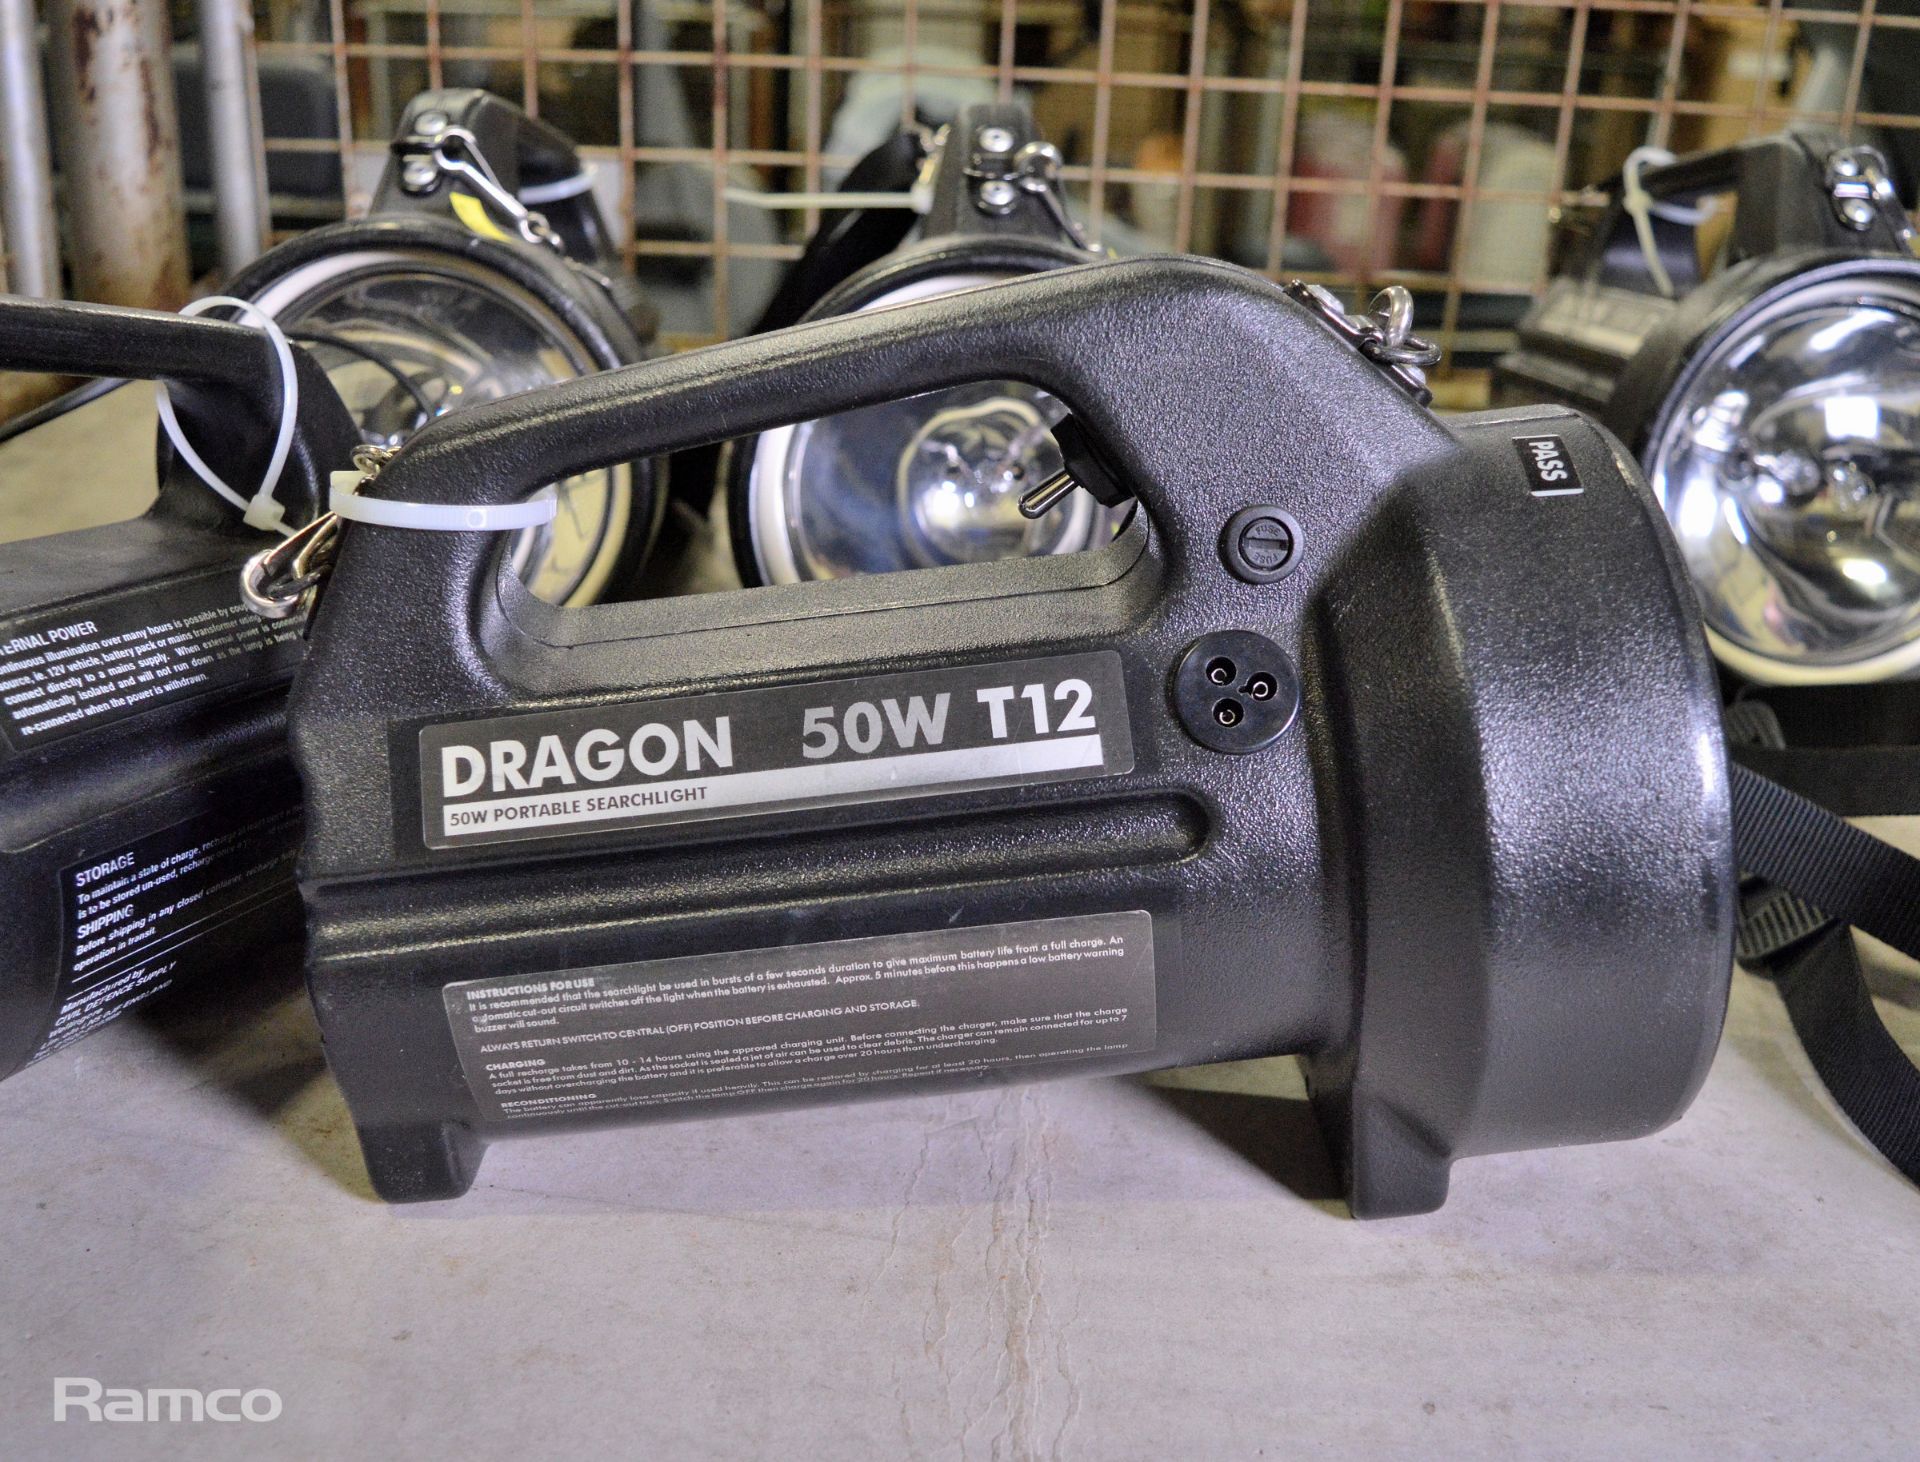 4x Dragon 100w T12 remote control searchlights, 2 chargers - Image 3 of 3